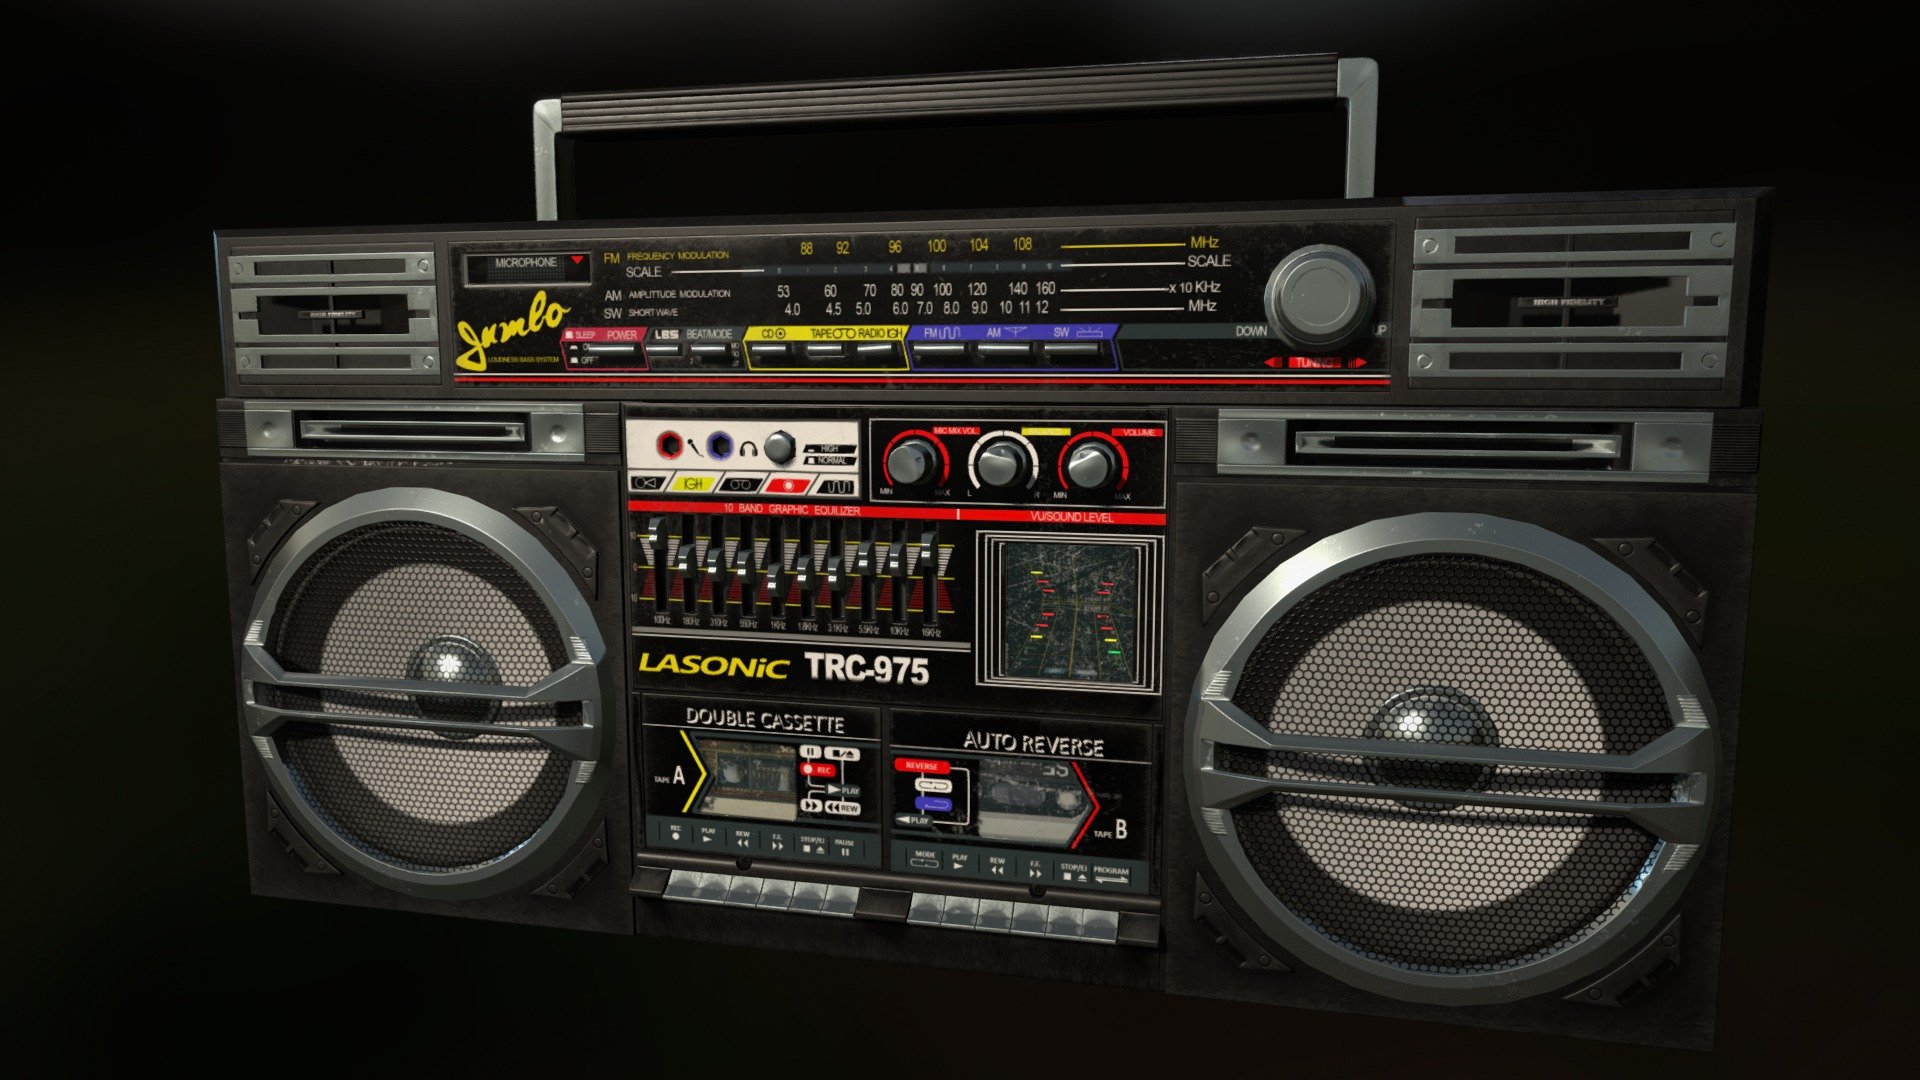 Lasonic TRC-975 boombox, modeled in 3dsmax and textured using substance painter 2 and photoshop 3d model